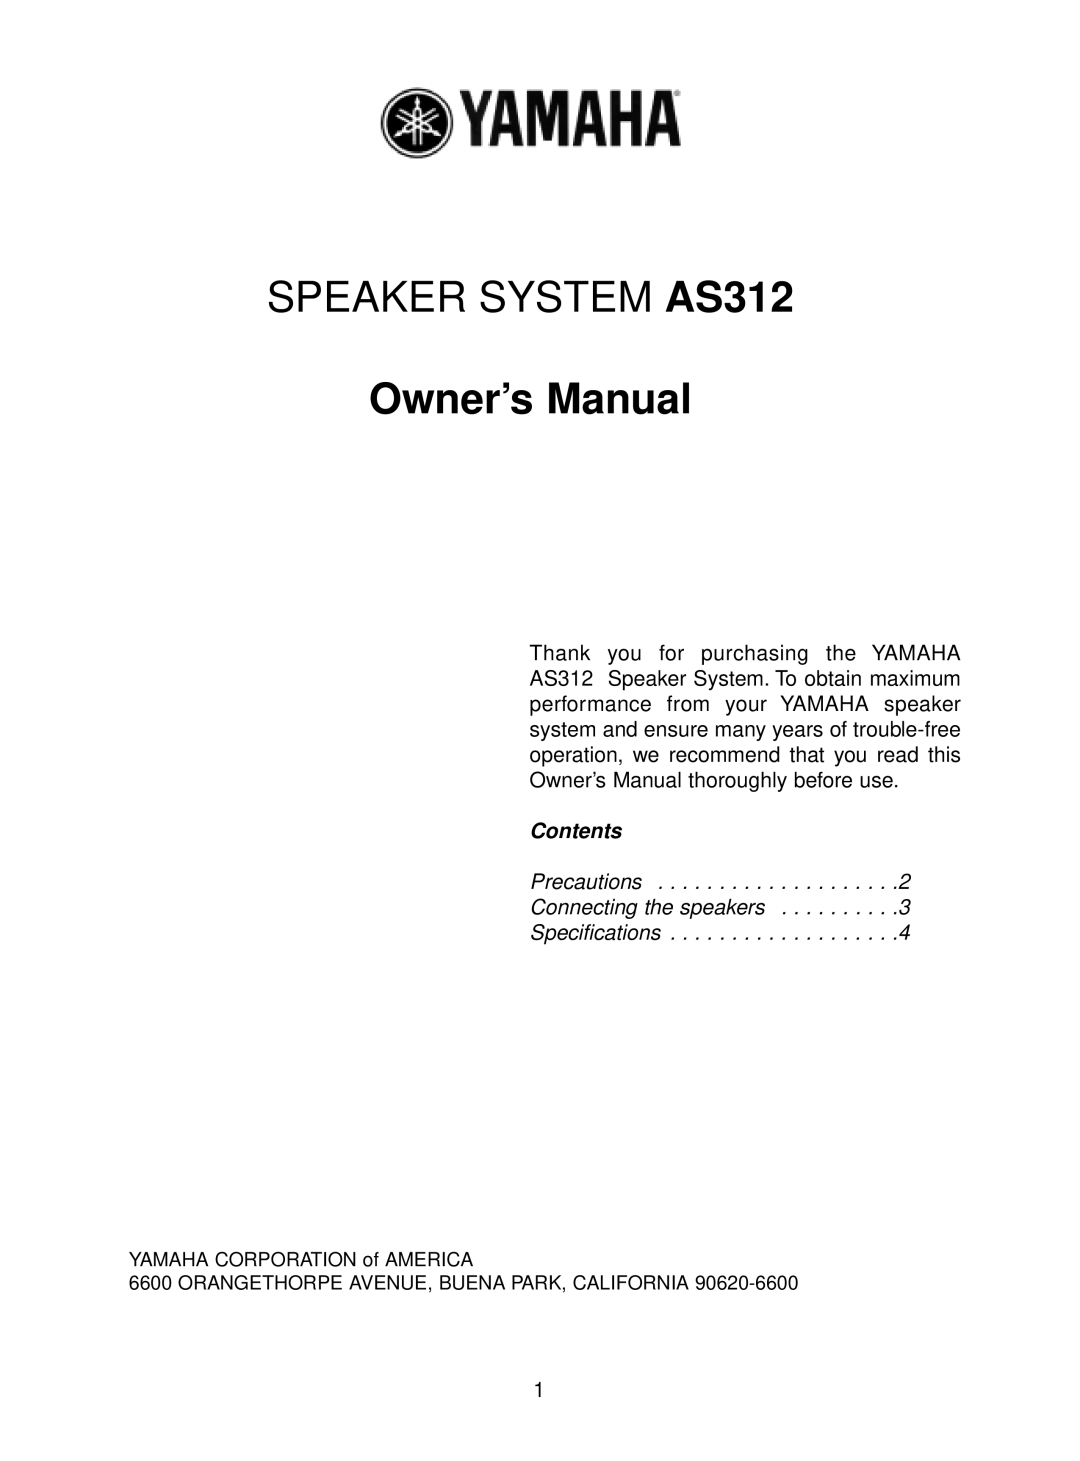 Yamaha owner manual SPEAKER SYSTEM AS312, Contents, Precautions, Connecting the speakers 